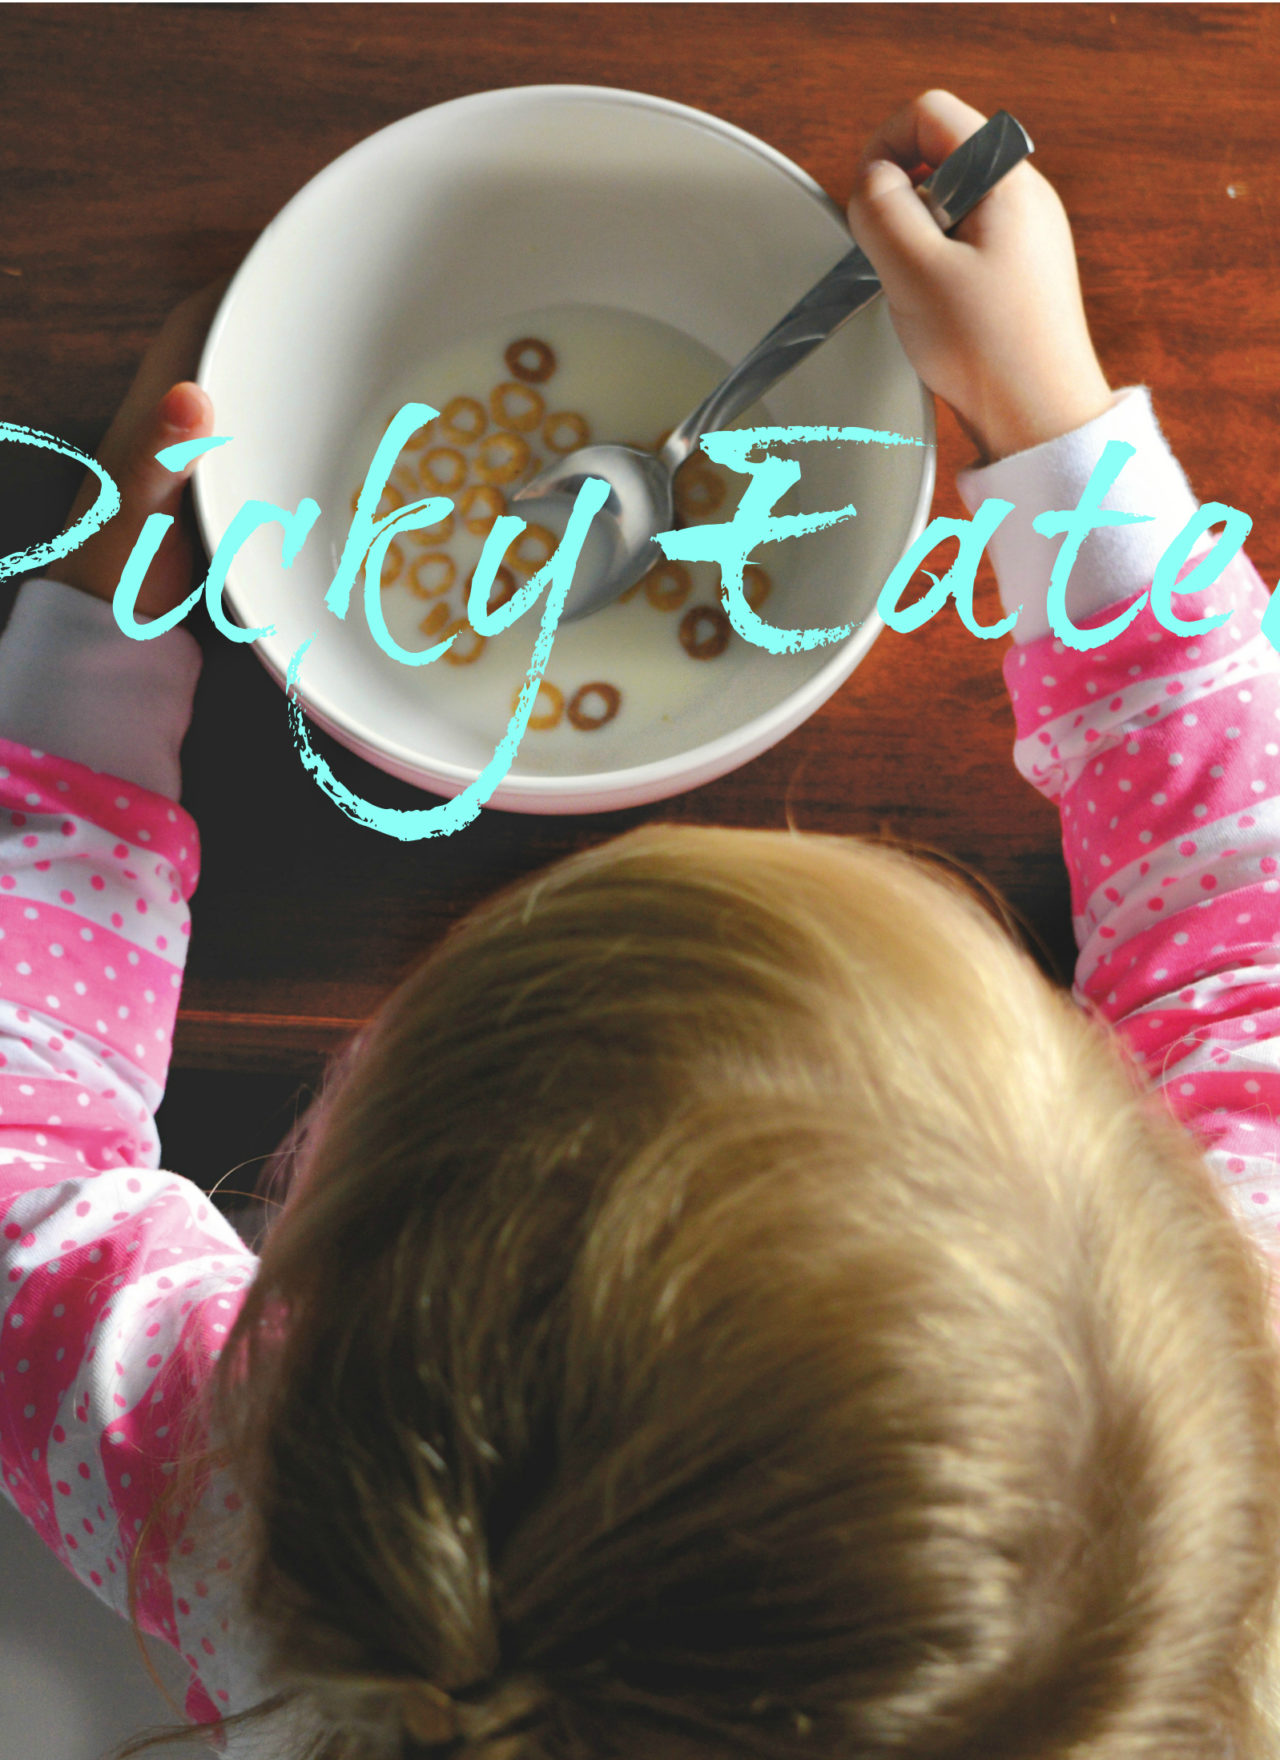 Calling All Picky Eaters- or Parents of Picky Eaters!